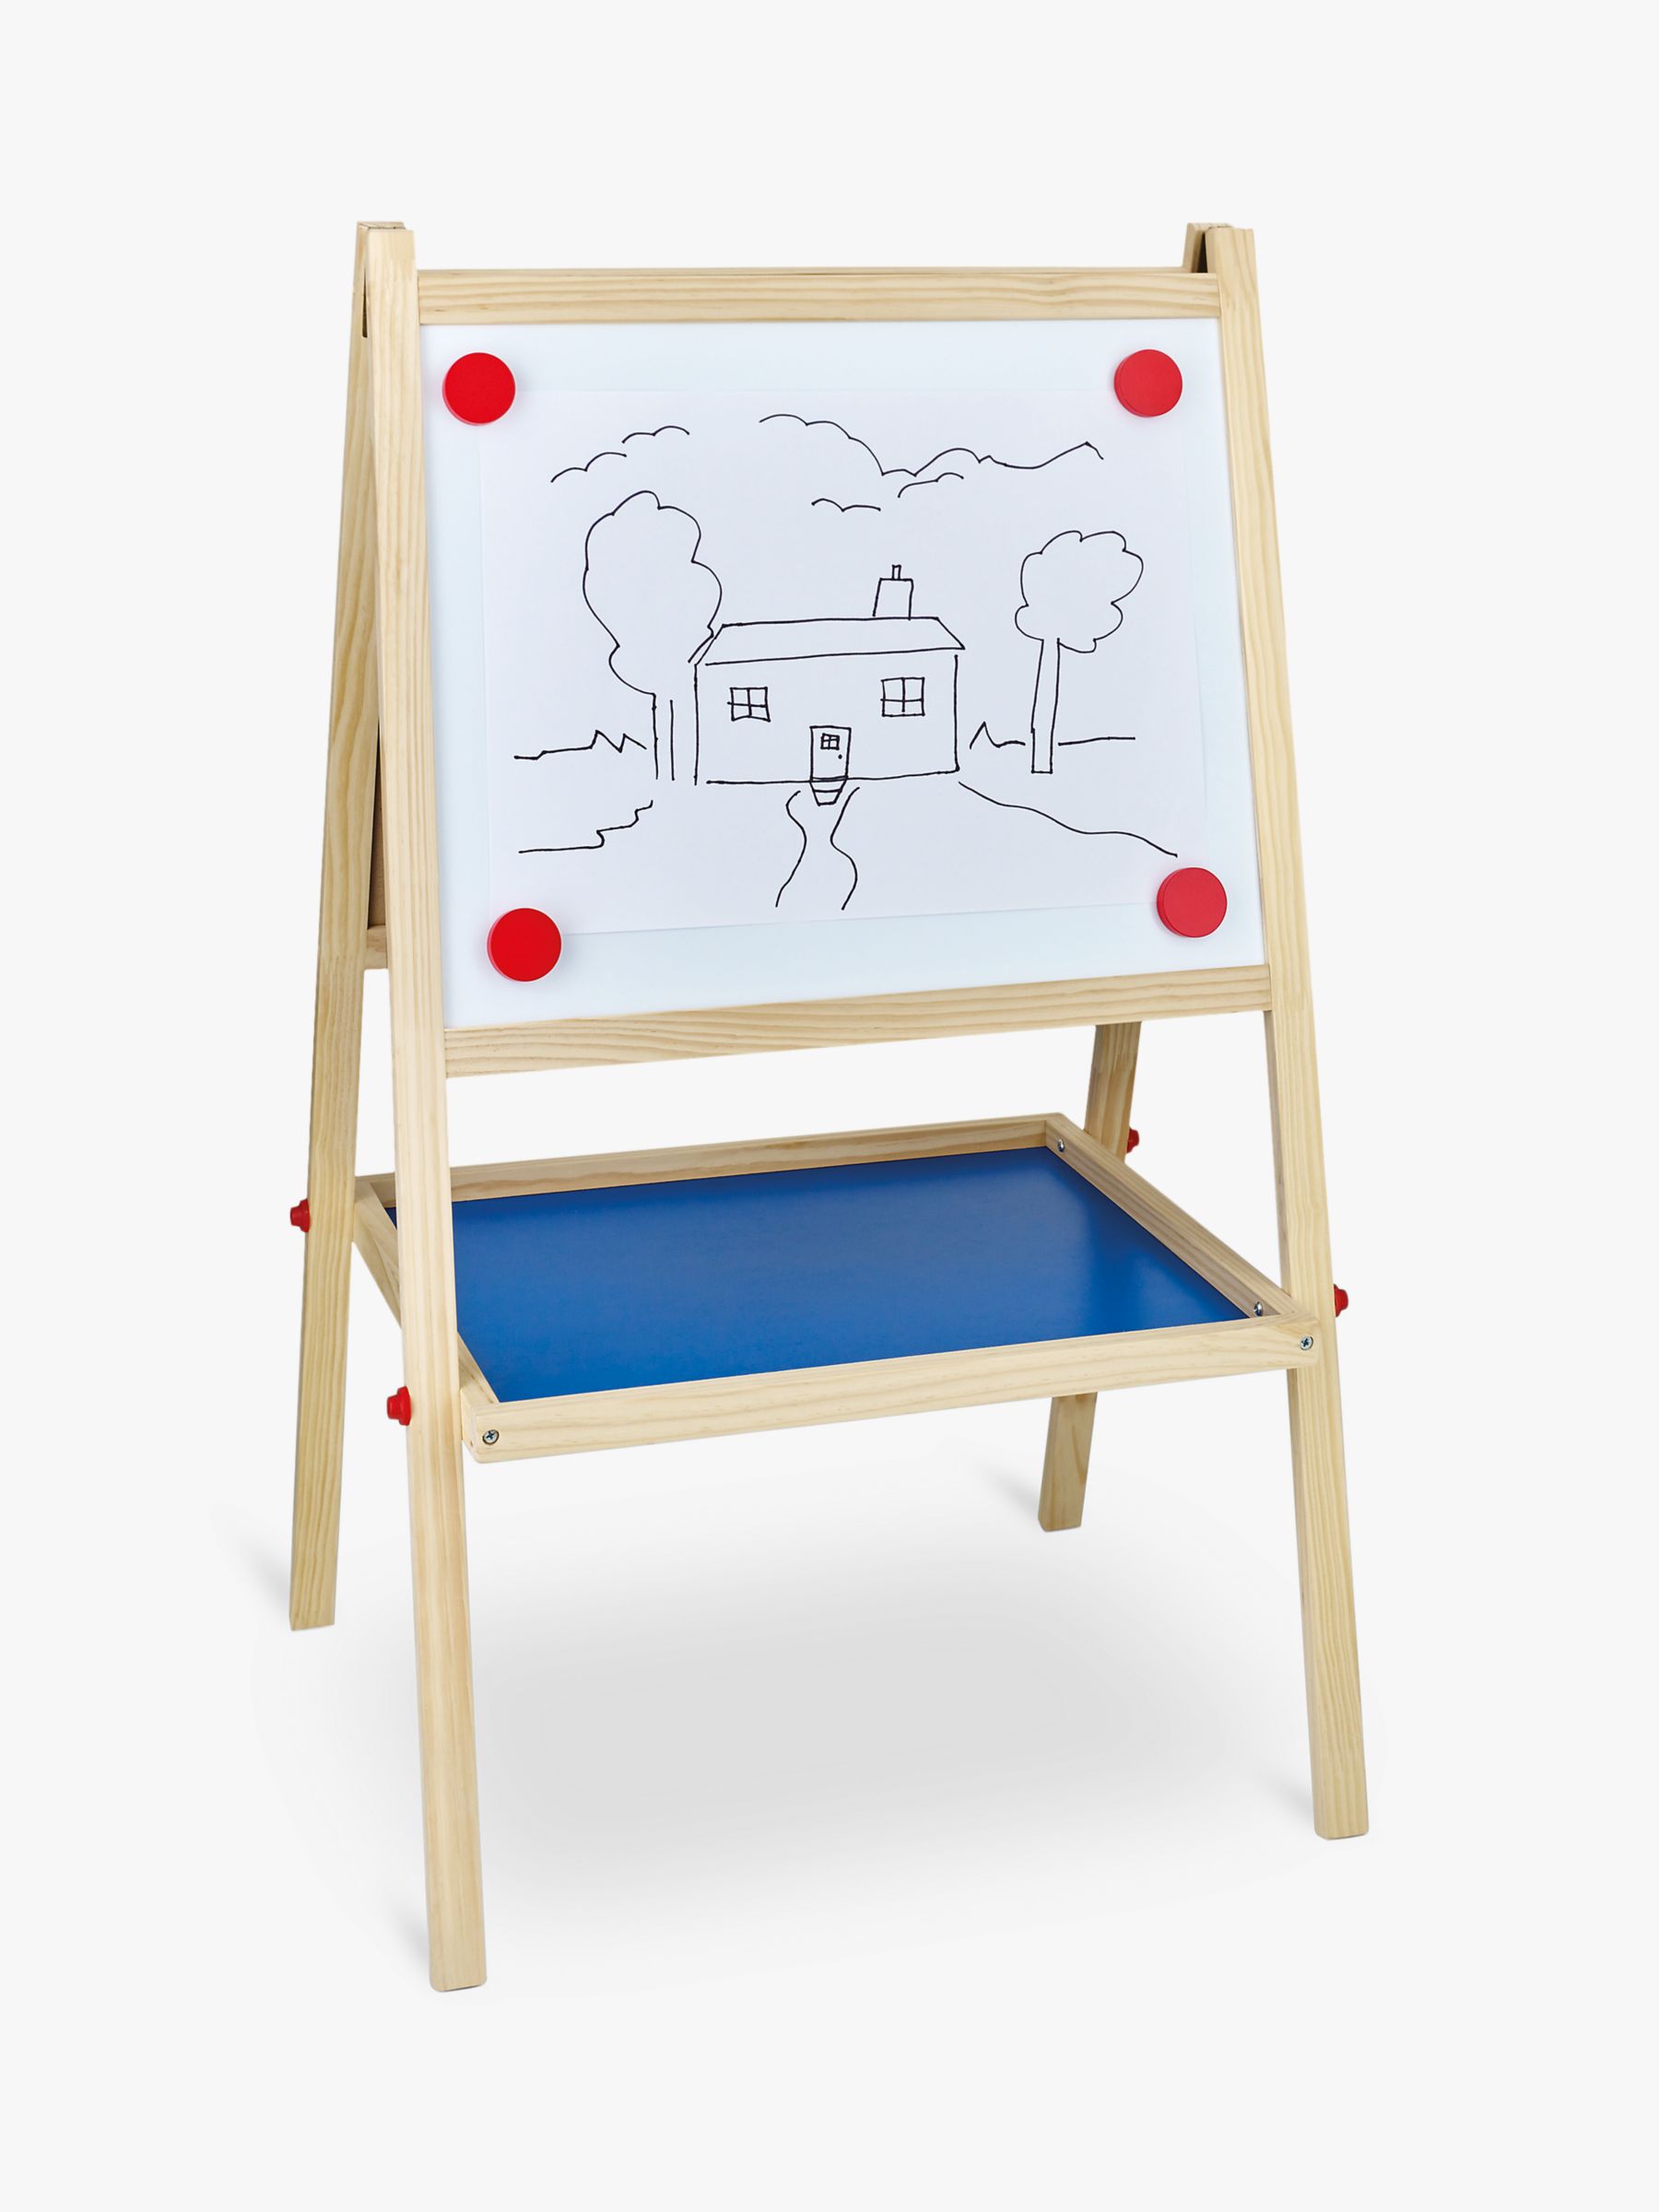 Wooden Display Floor Easel - FOR RENT LOCALLY